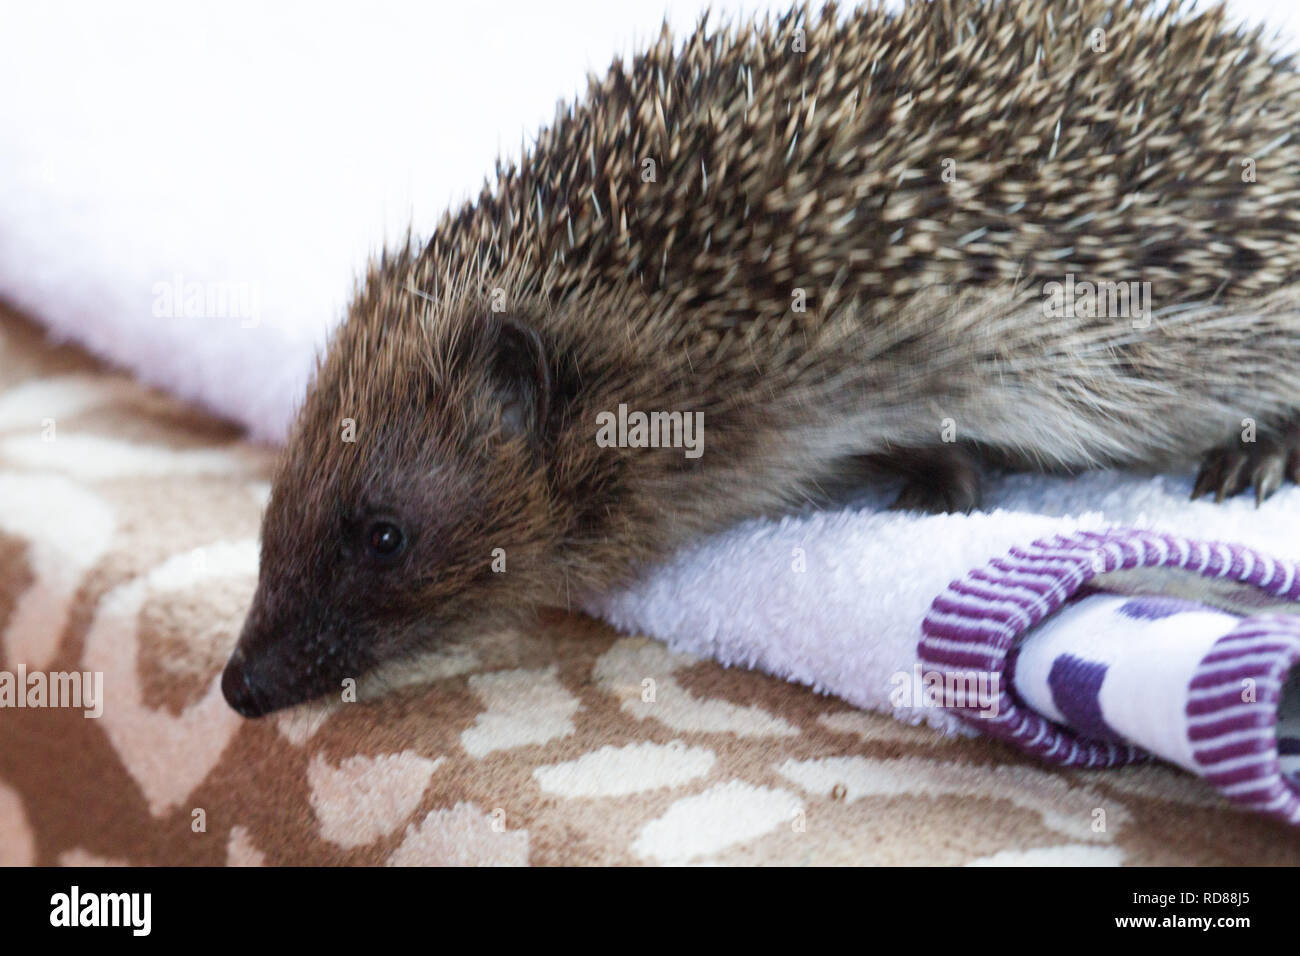 Hedgehog ( Erinaceus europaeus ) , in wildlife hos[pital that cares for ,rehabilitates and releases animals back into the wild . Stock Photo